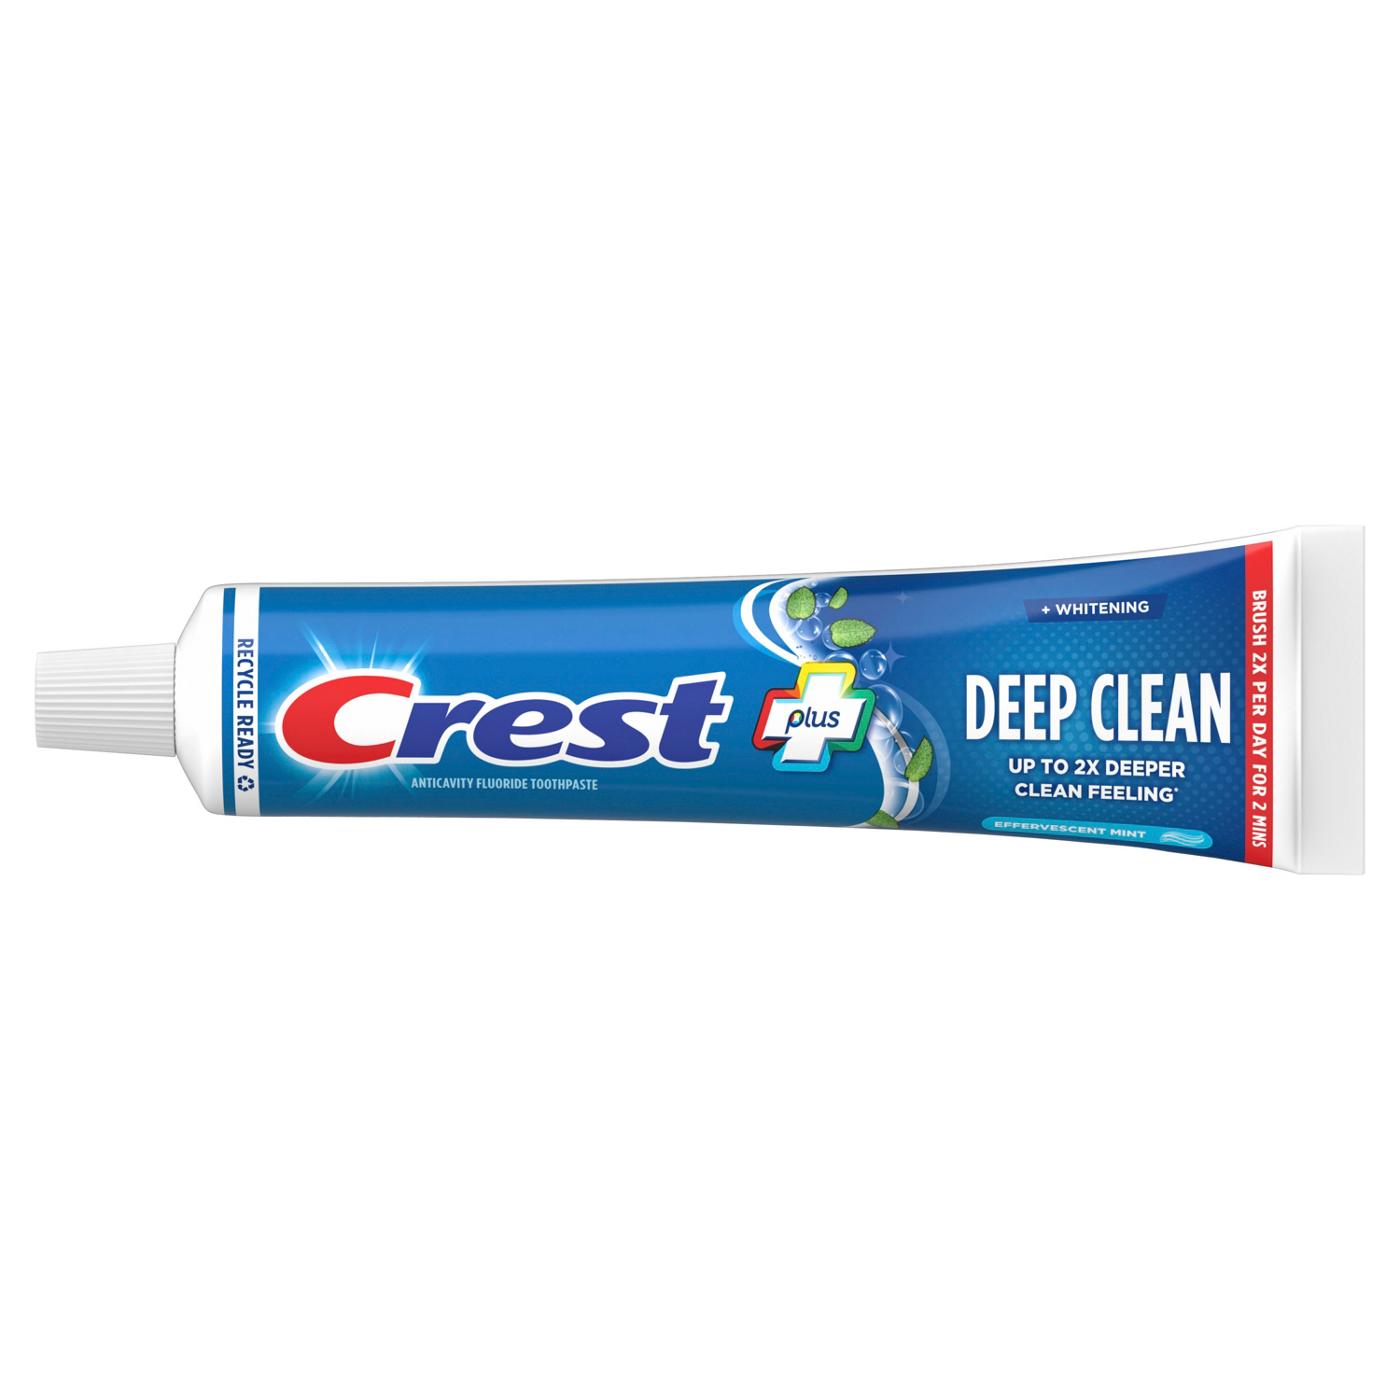 Crest Complete + Deep Clean Whitening Toothpaste - Effervescent Mint; image 4 of 10